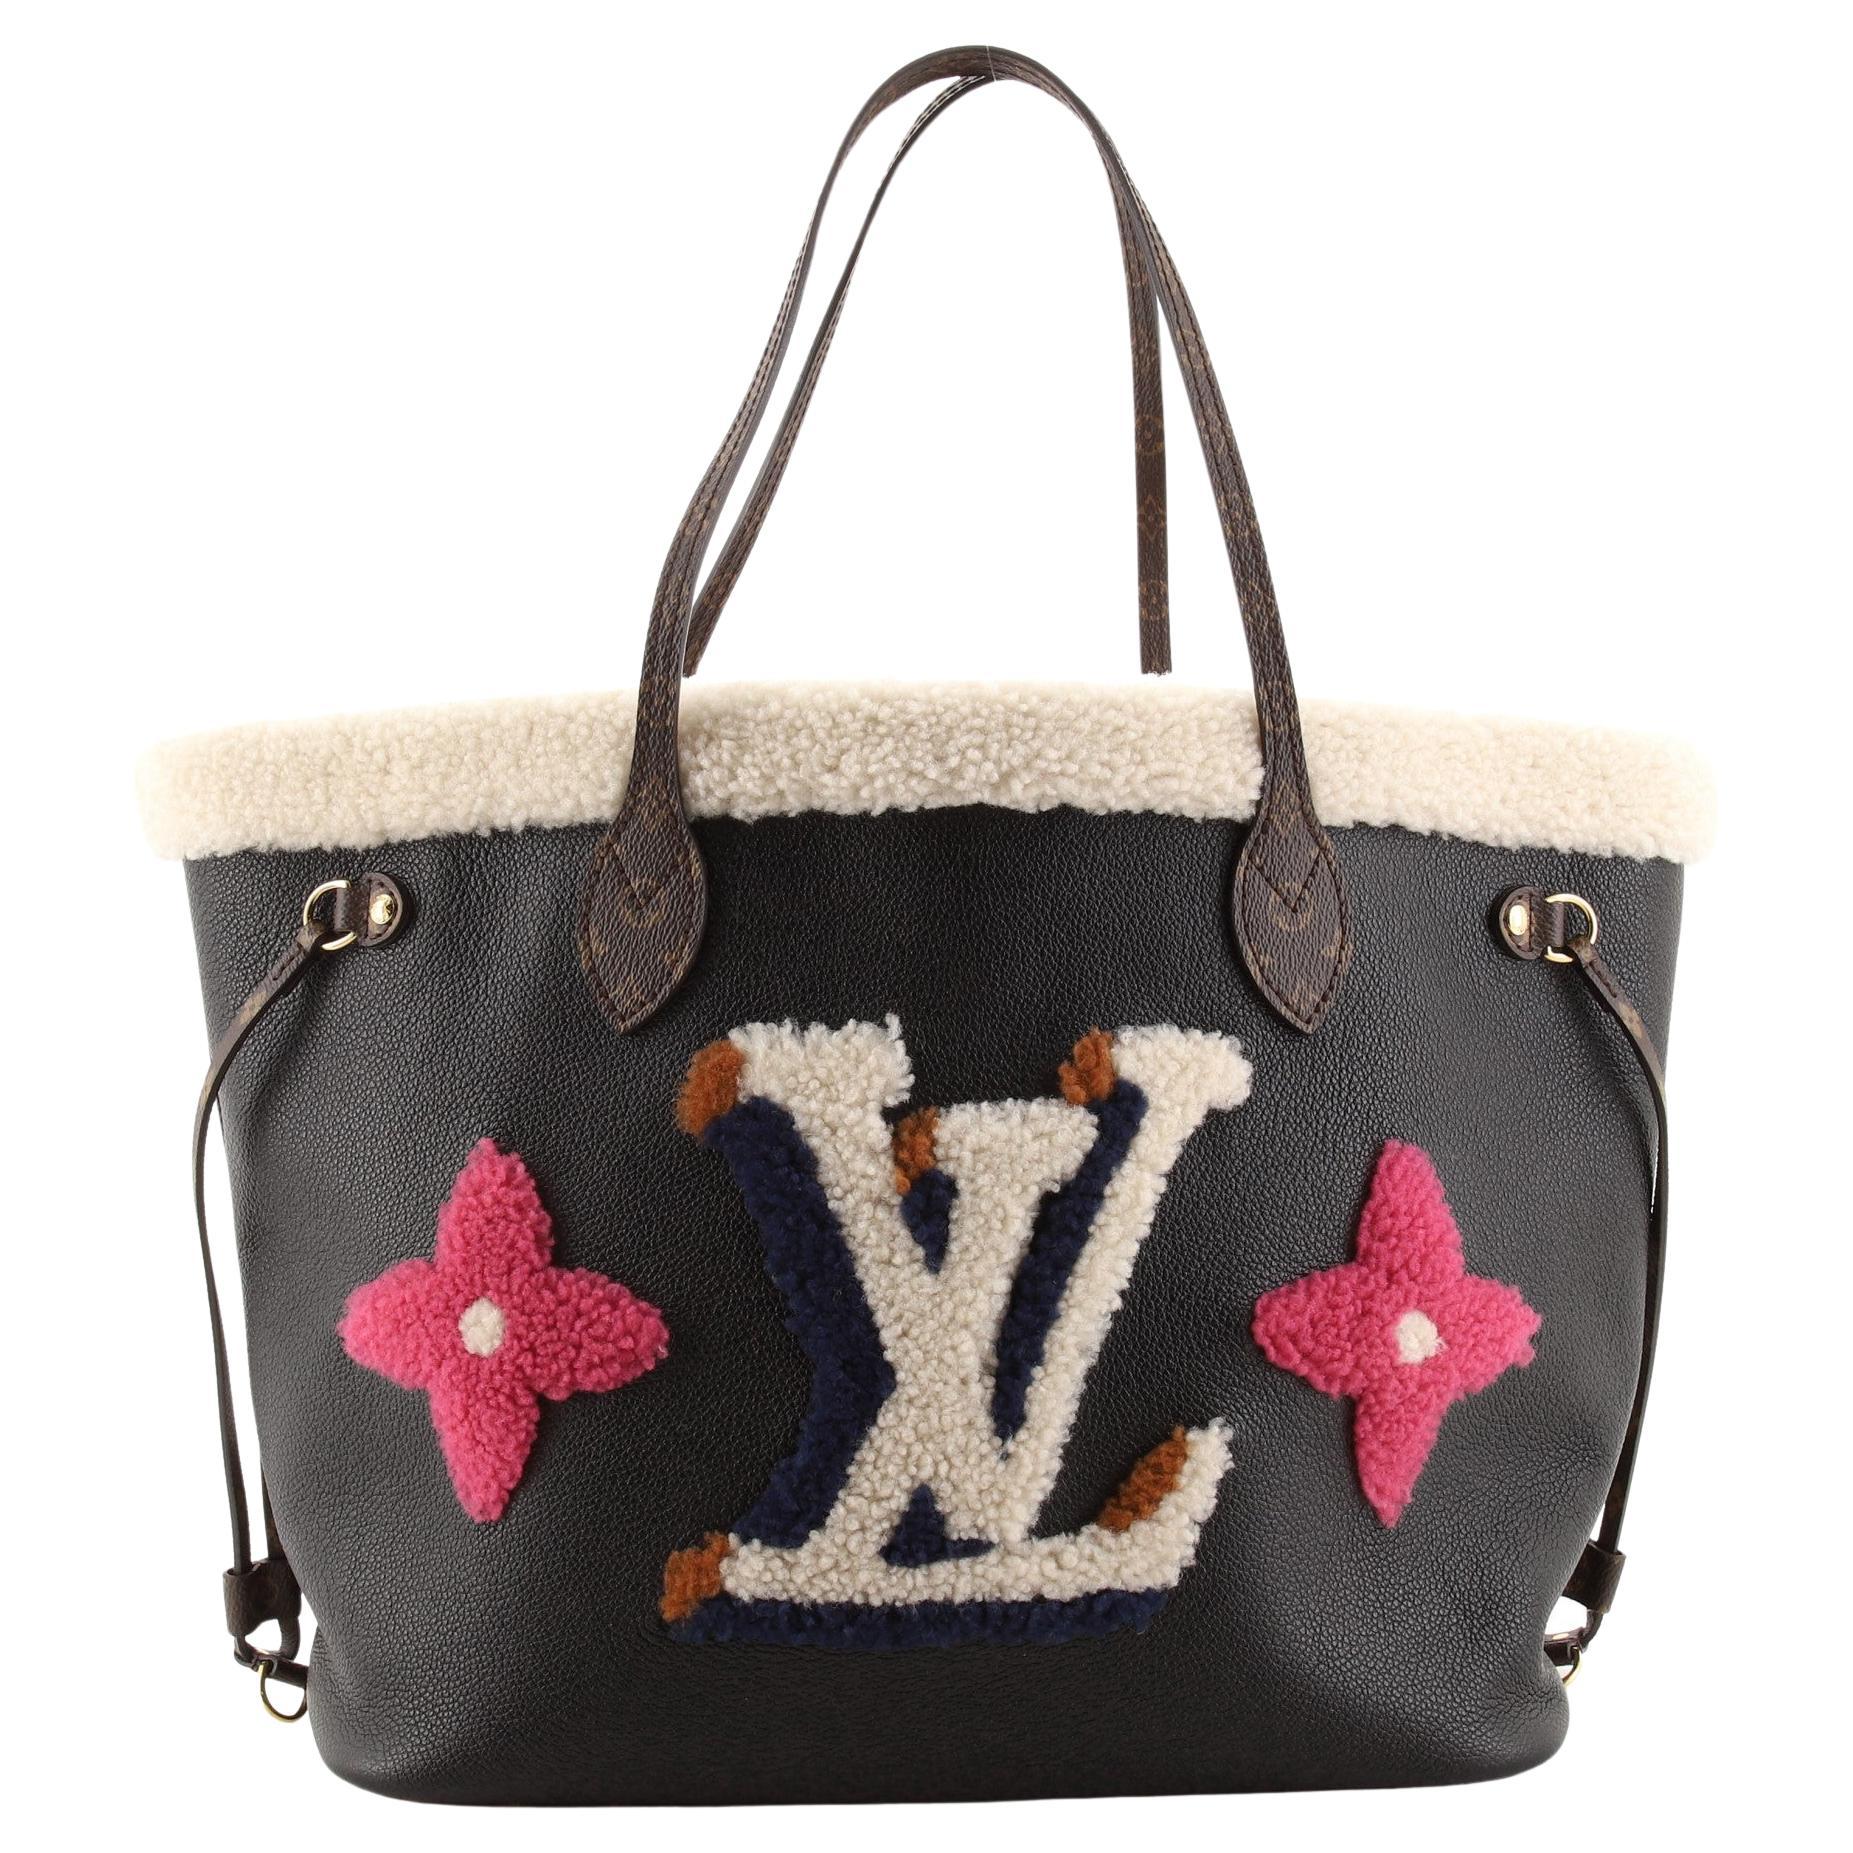 Louis Vuitton Neverfull NM Tote Leather and Monogram Teddy Shearling MM